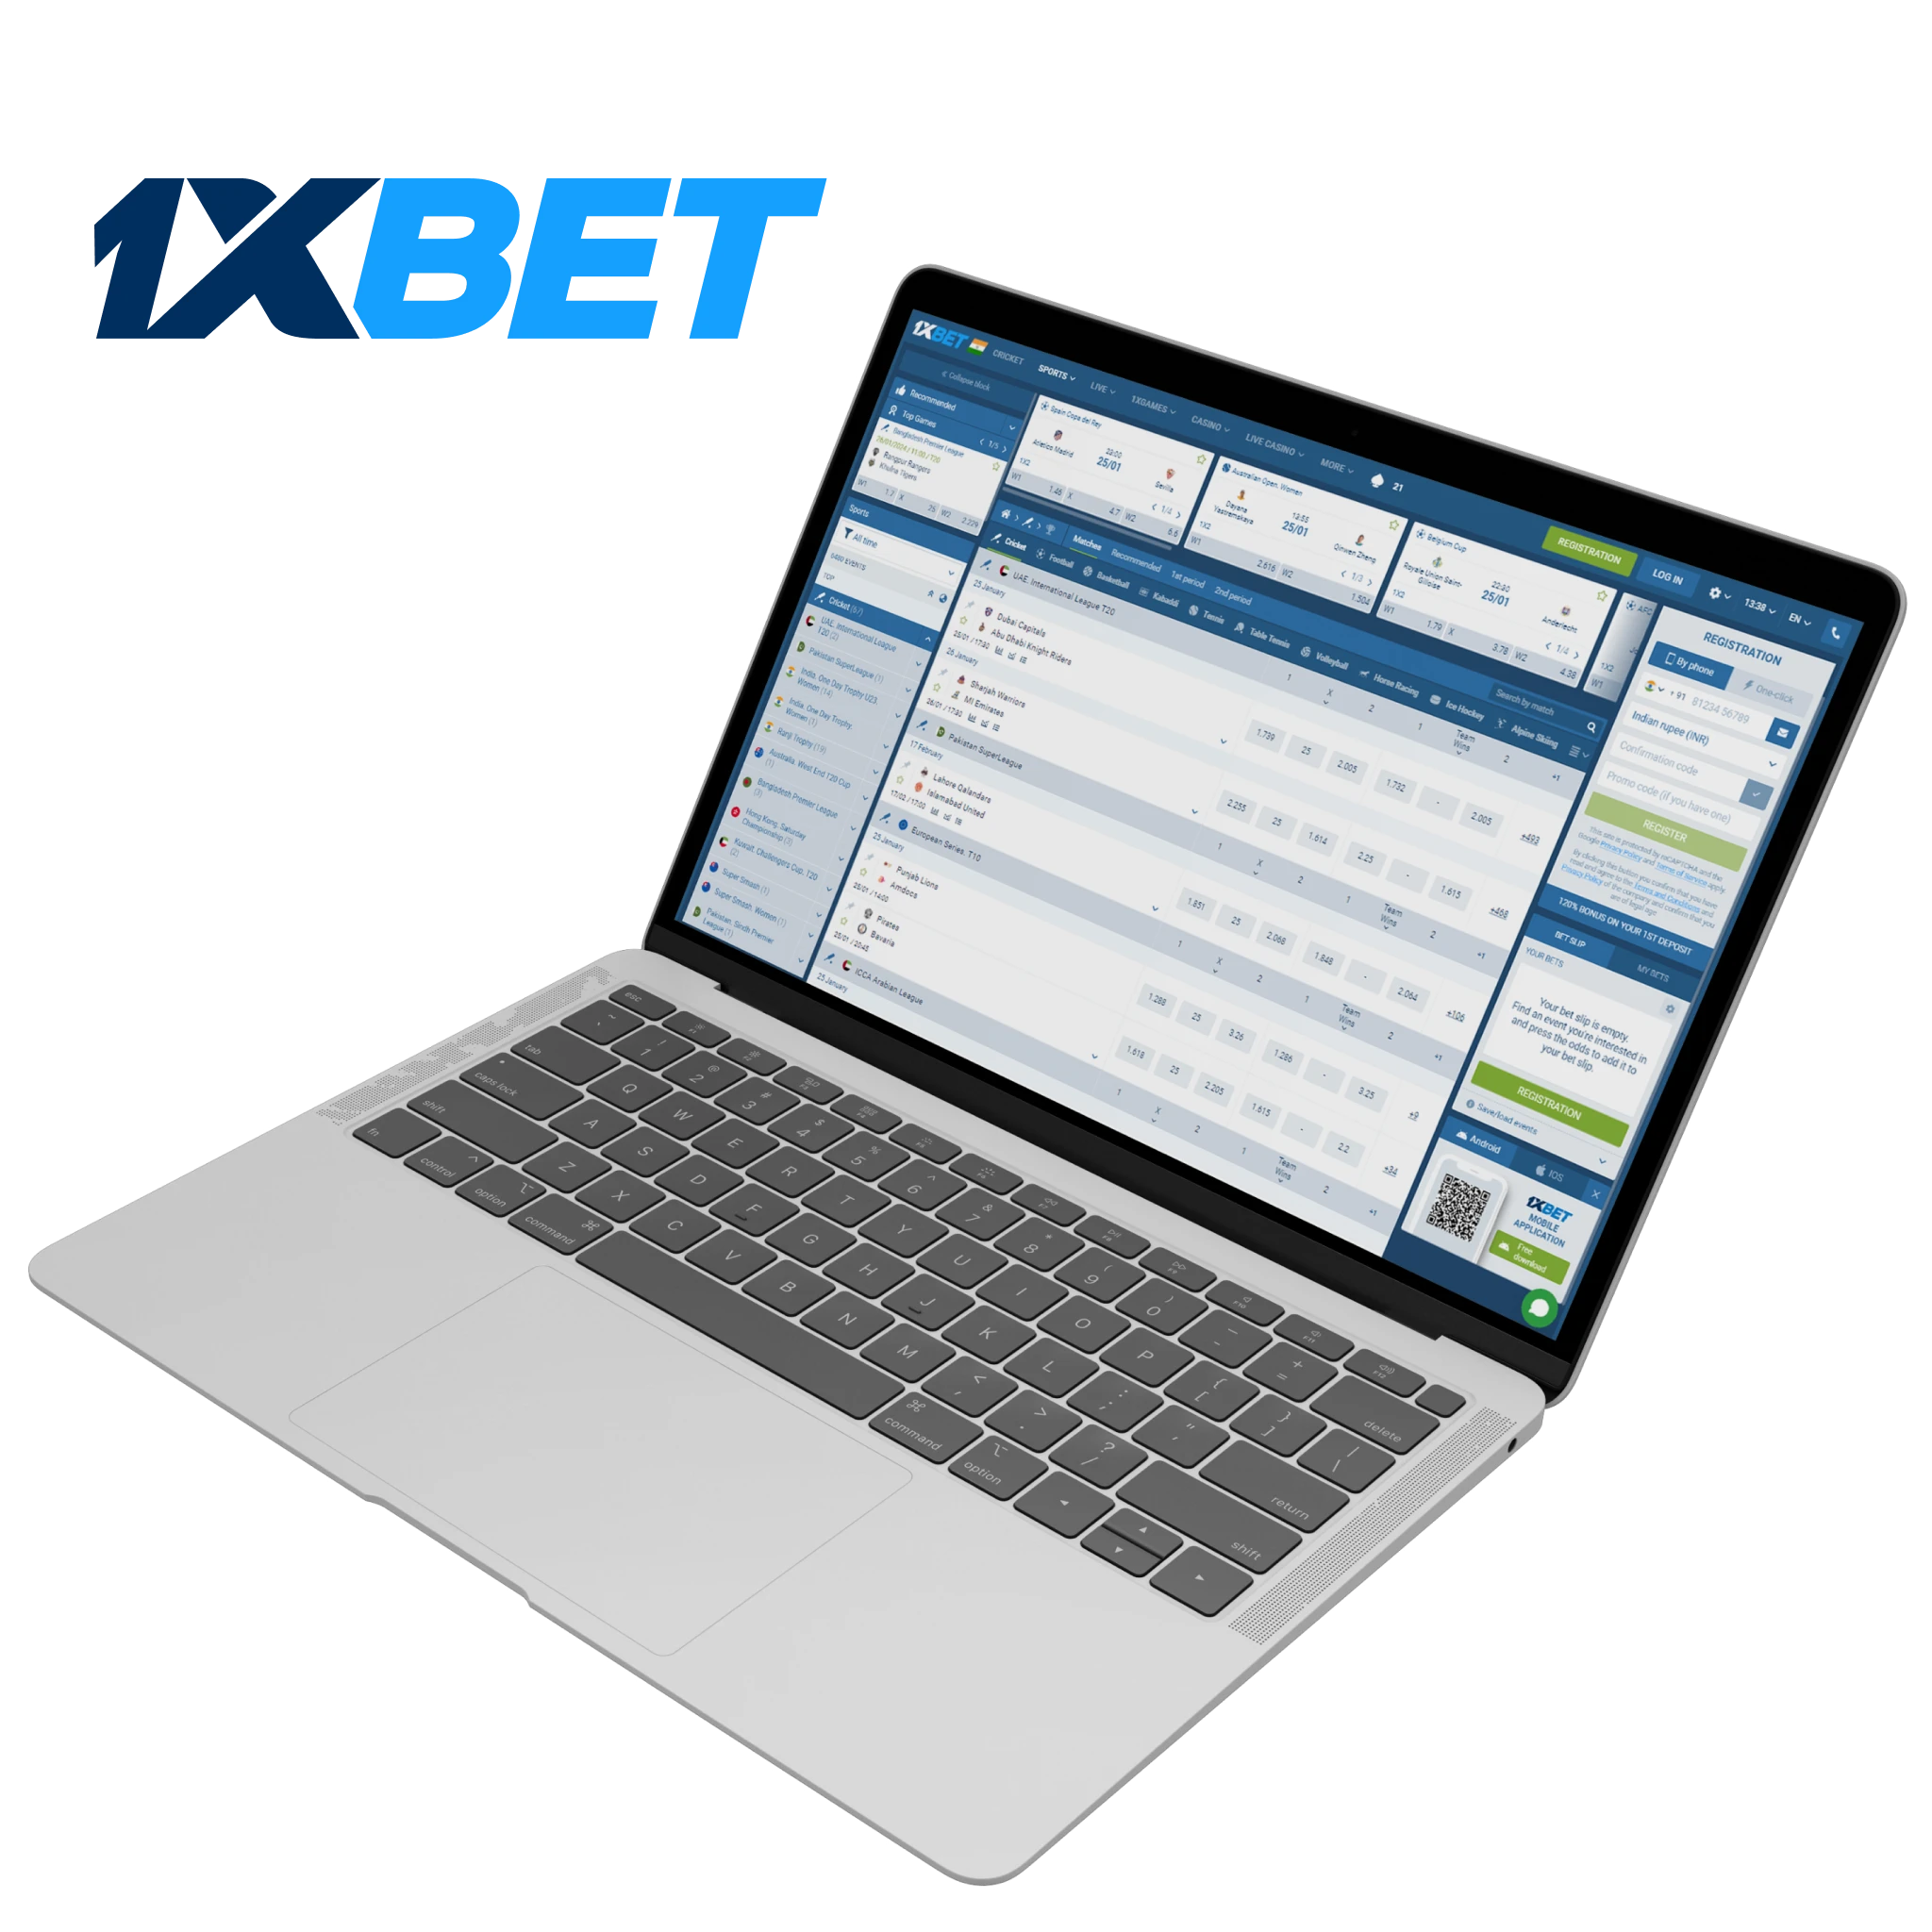 1xBet is one of the most popular bookmaker for cricket betting in India.